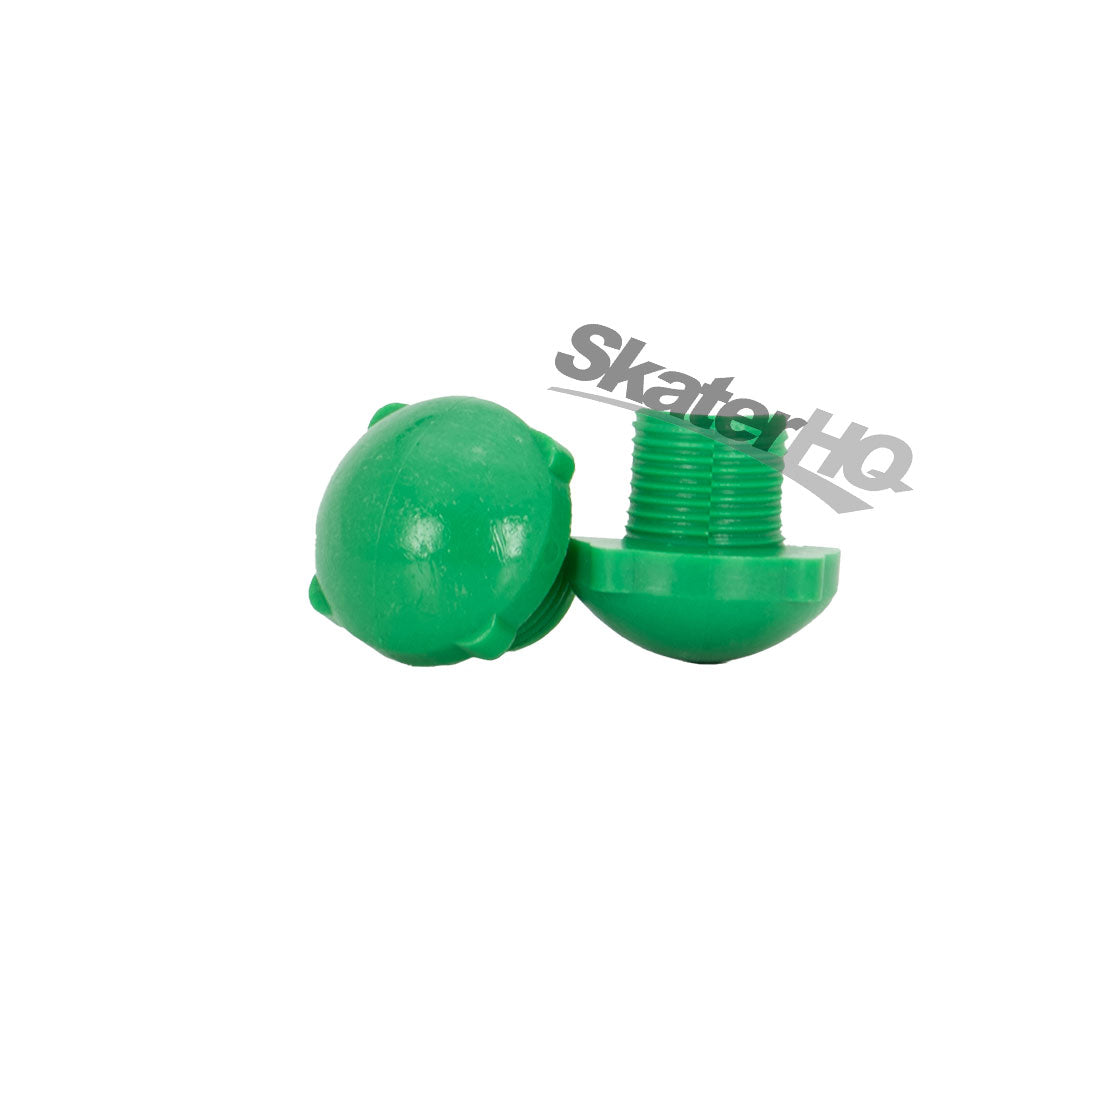 Sure-Grip Fomac Dance Plug 5/8 Pair - Green Roller Skate Hardware and Parts